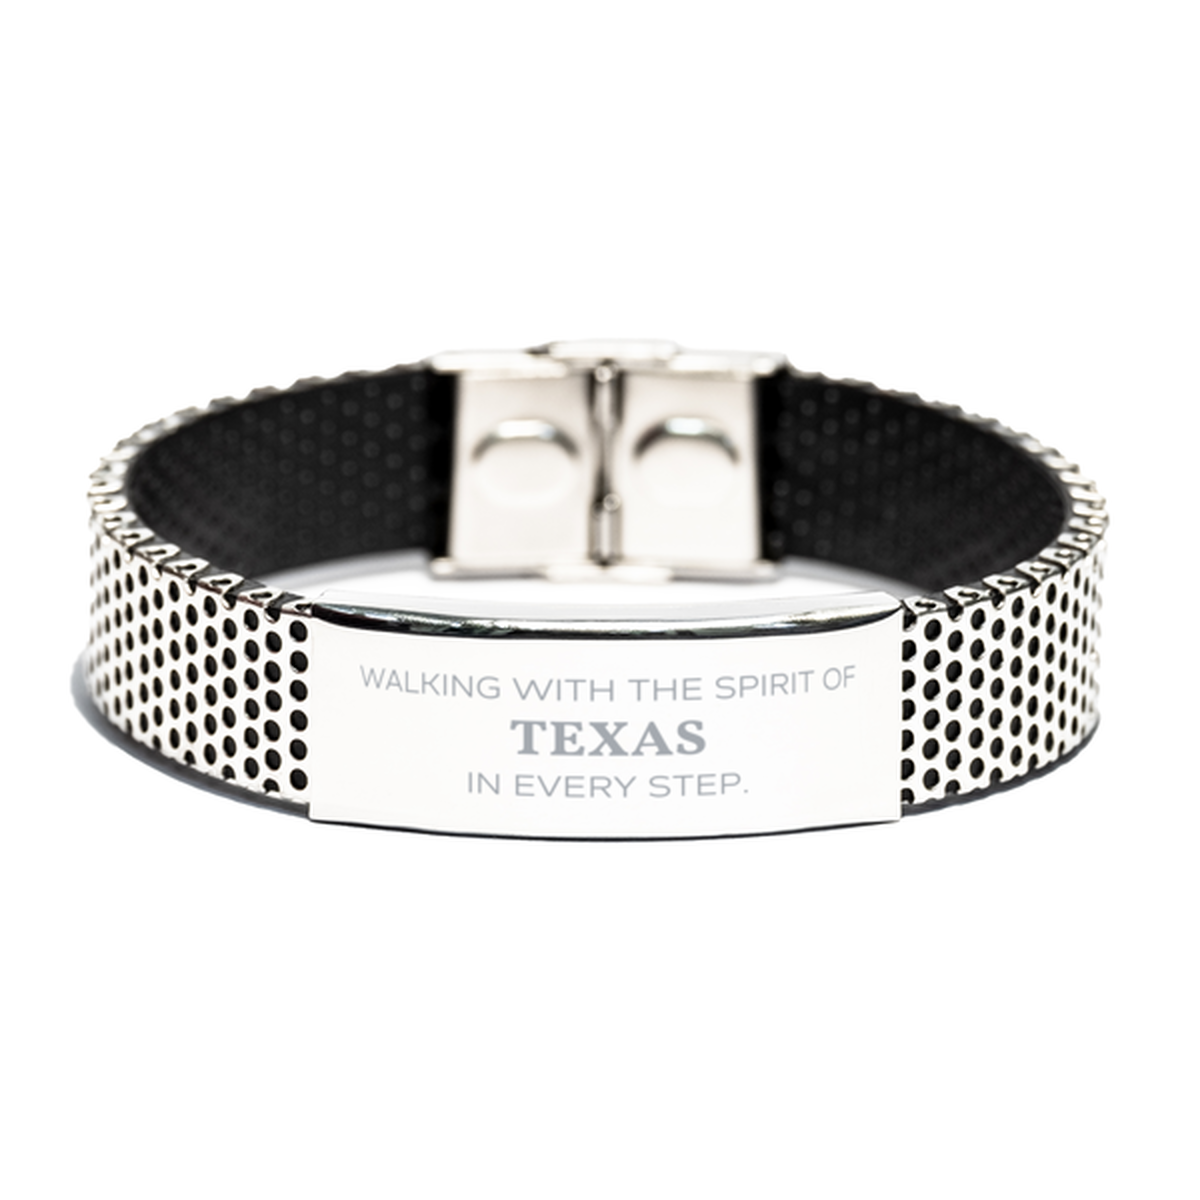 Texas Gifts, Walking with the spirit, Love Texas Birthday Christmas Stainless Steel Bracelet For Texas People, Men, Women, Friends